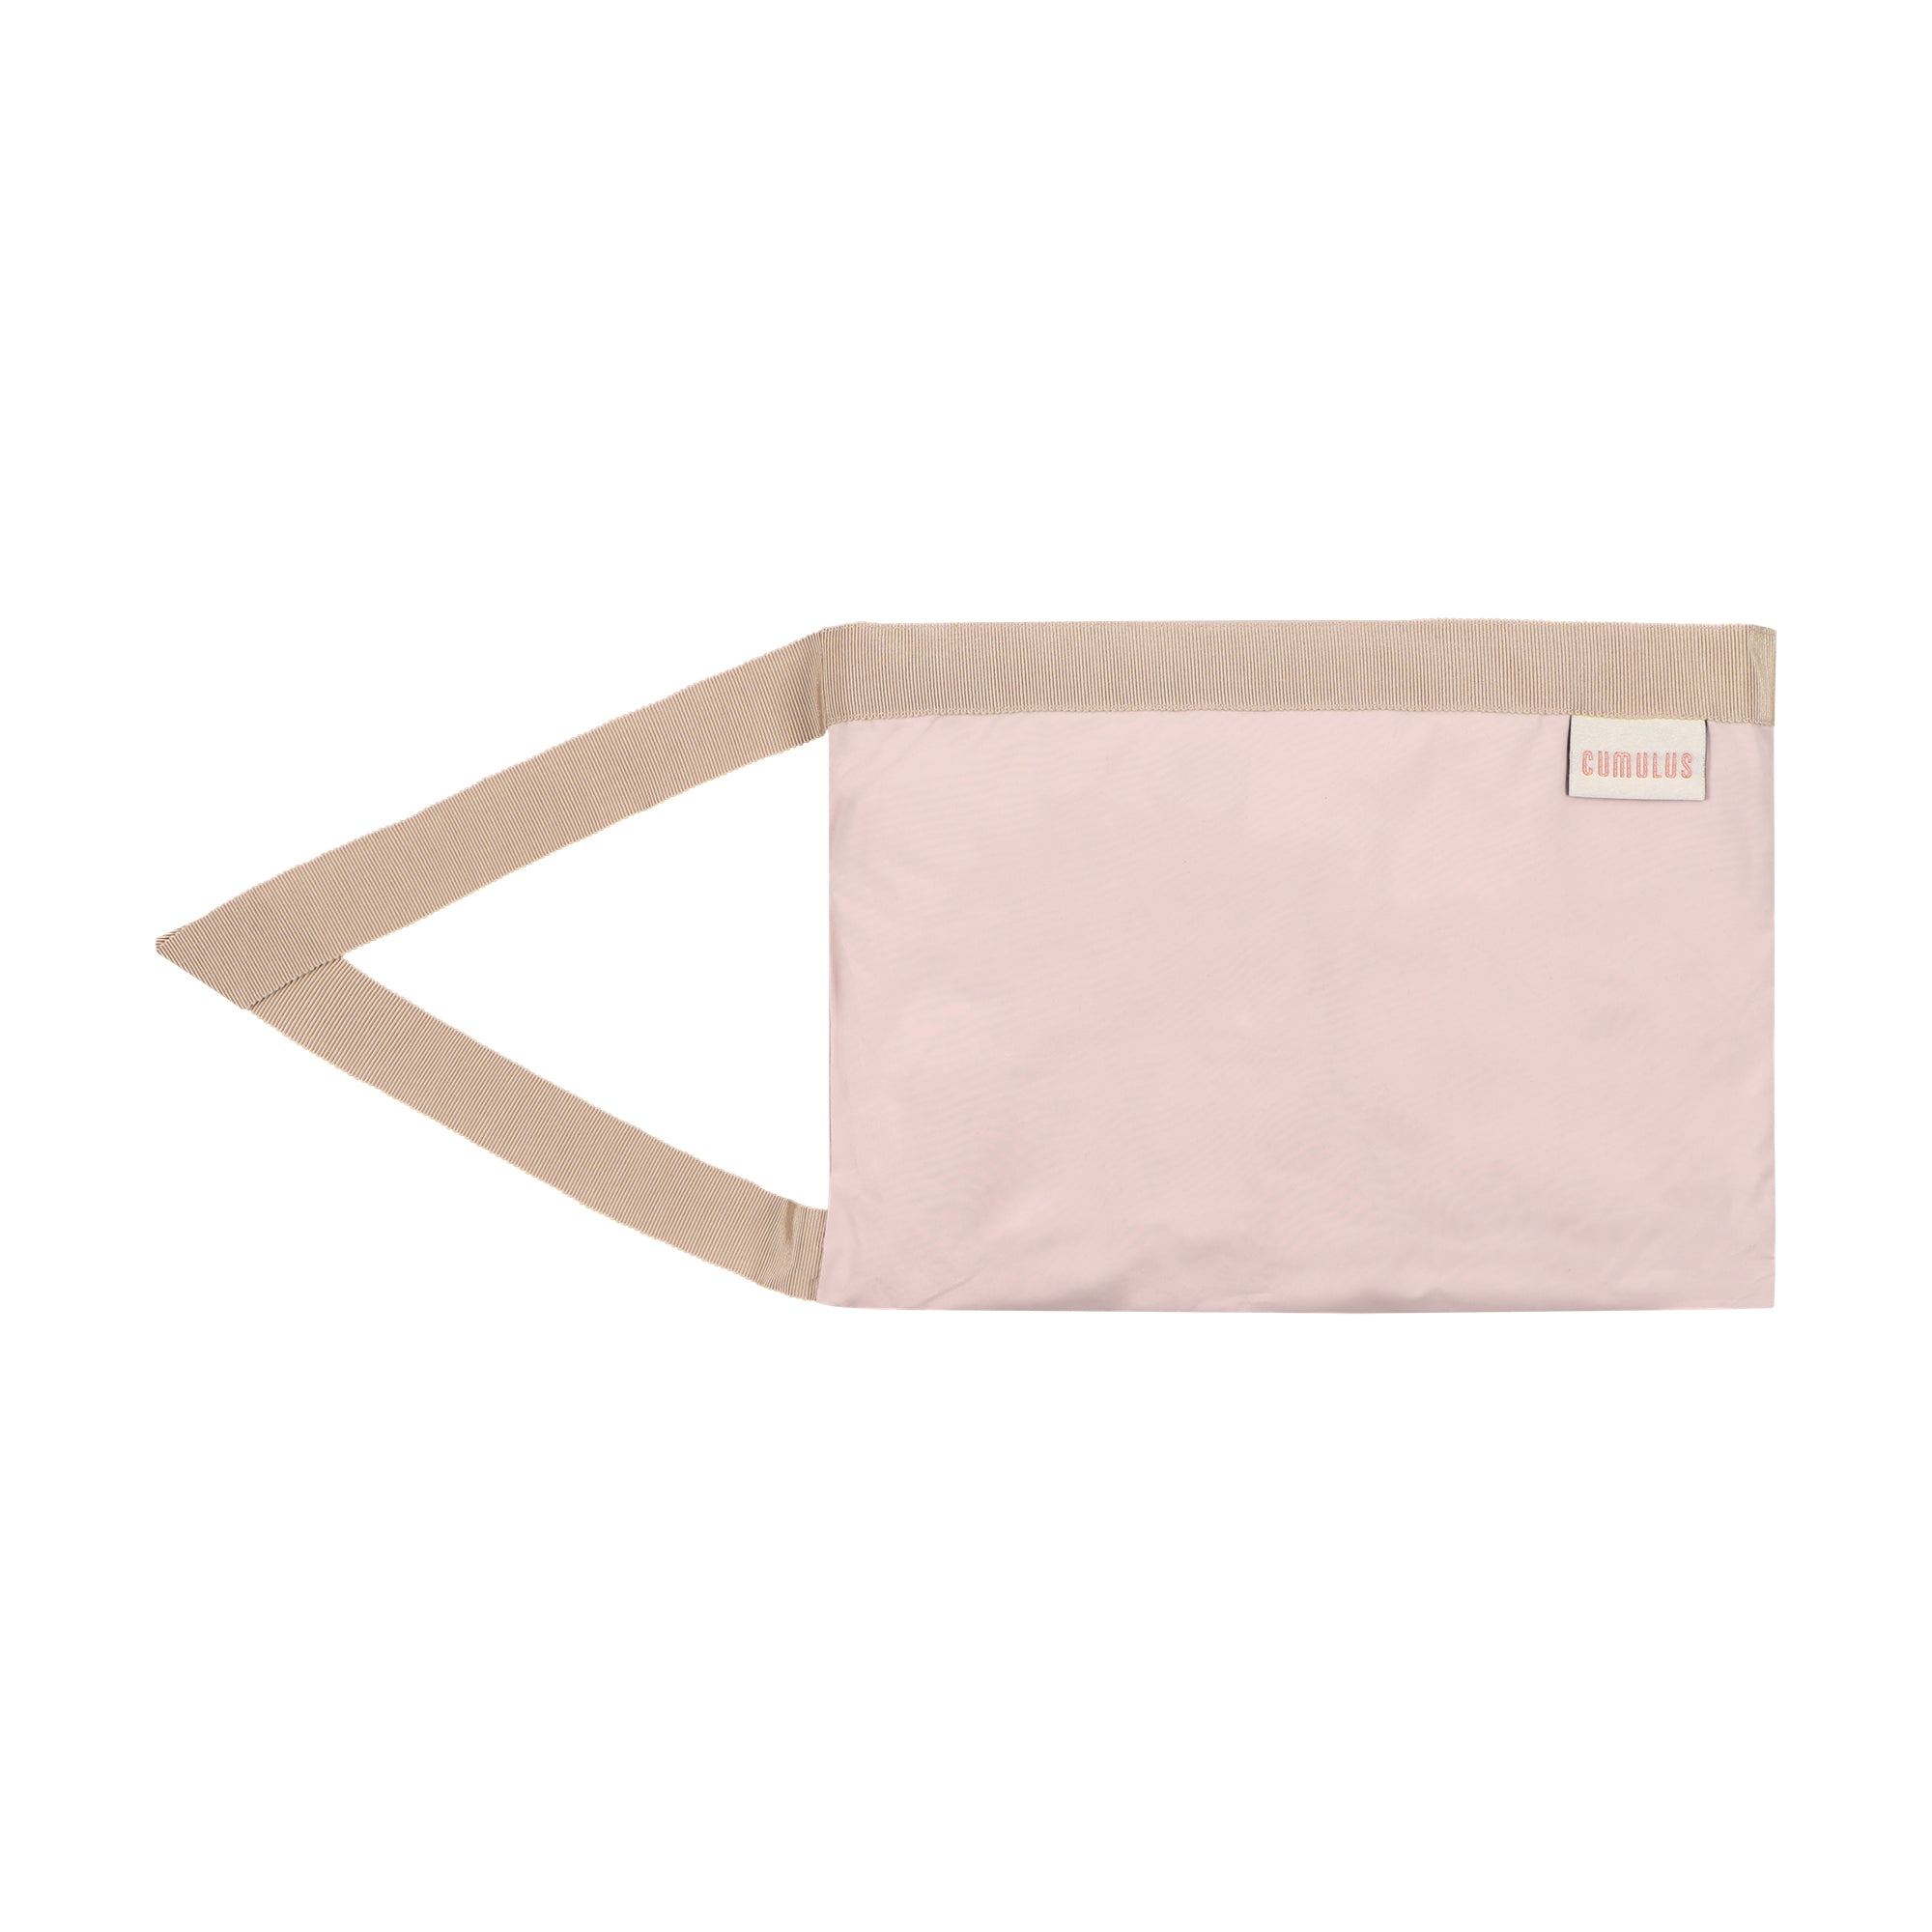 The classic raincoat - nude color - bag pouch